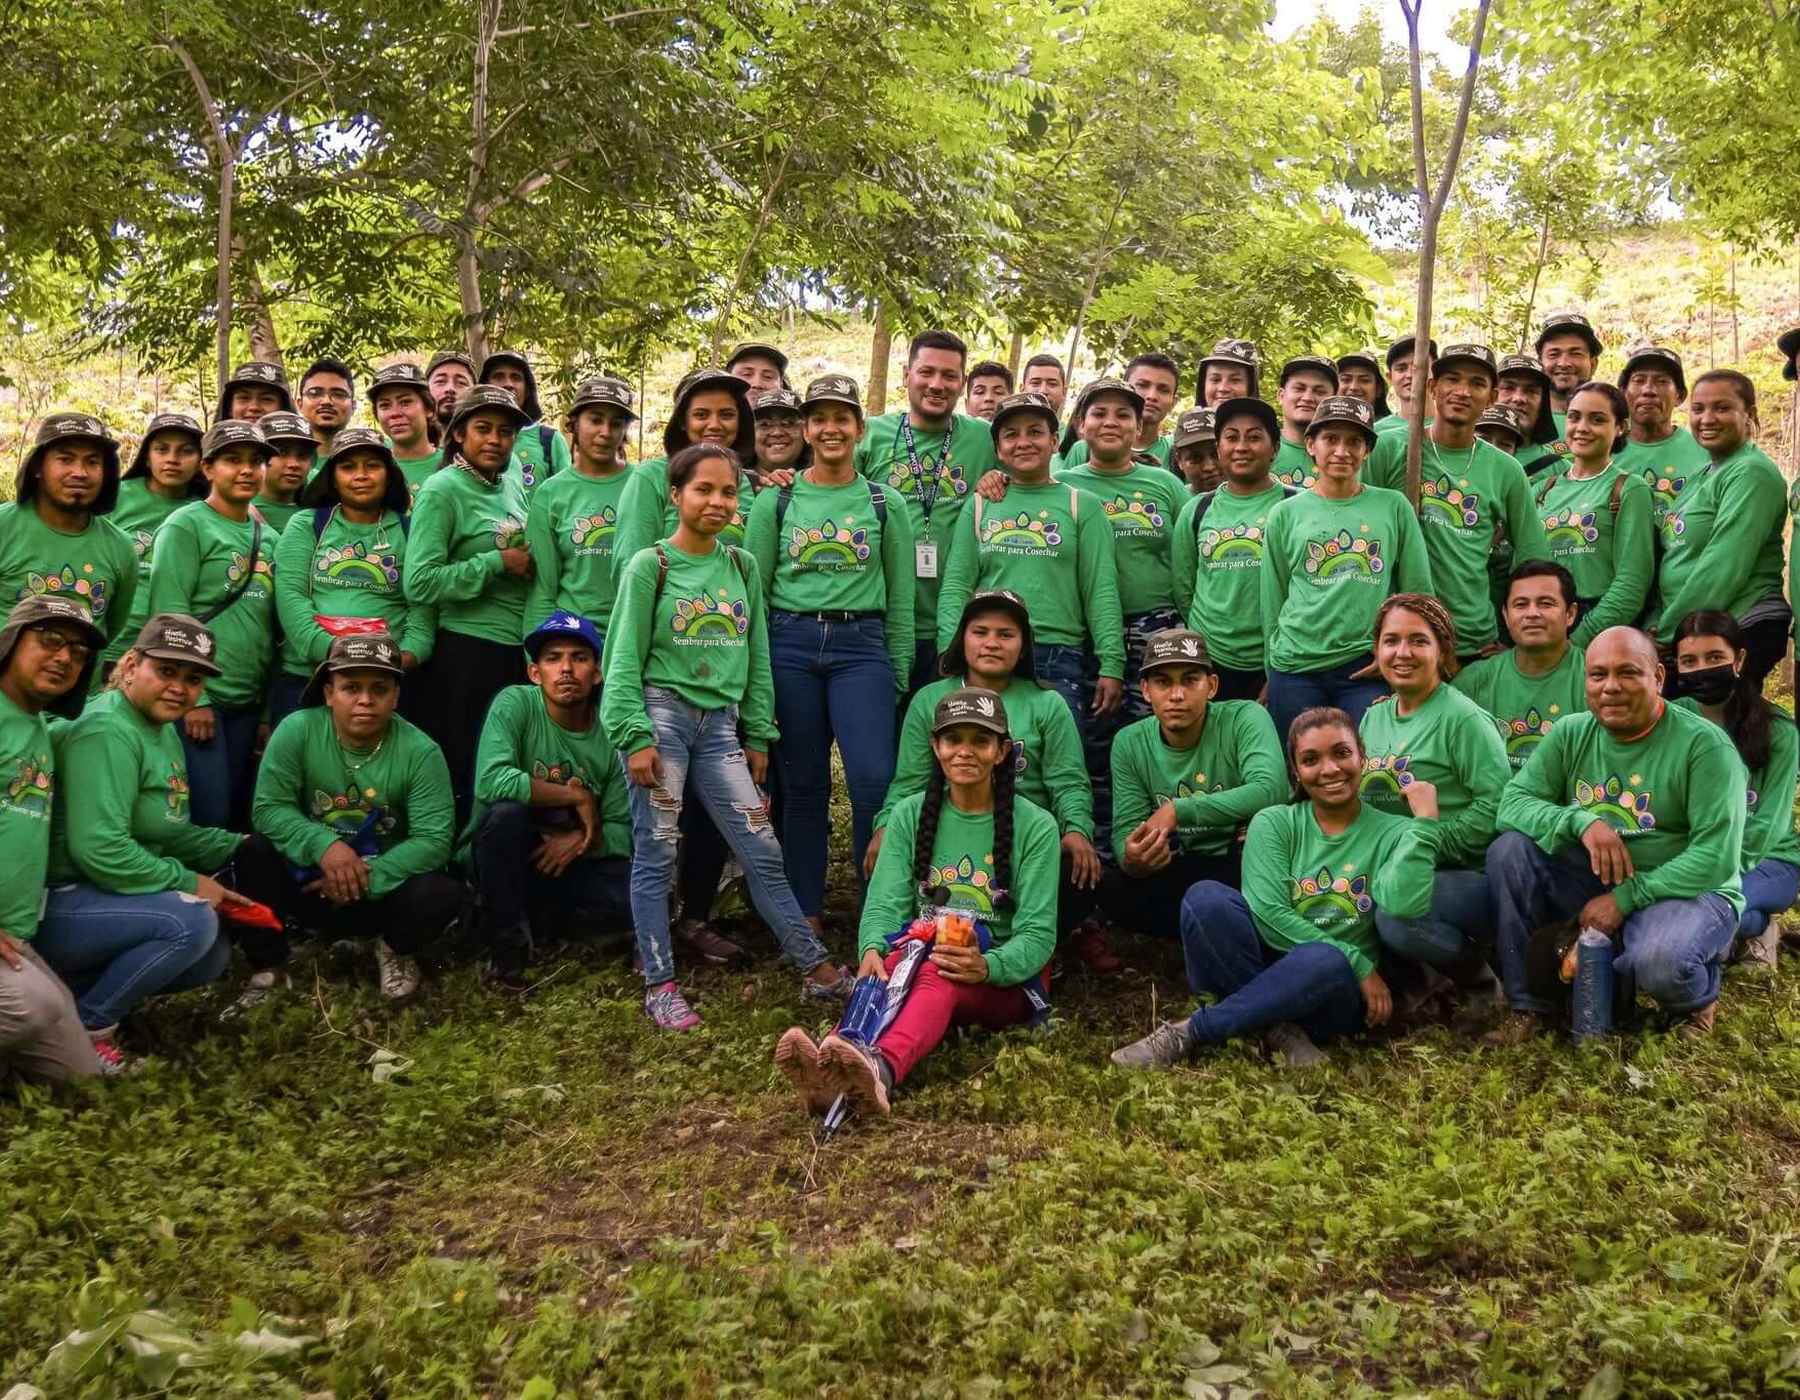 A group photo of employees from Nicaragua standing outside wearing green Gildan t-shirts.